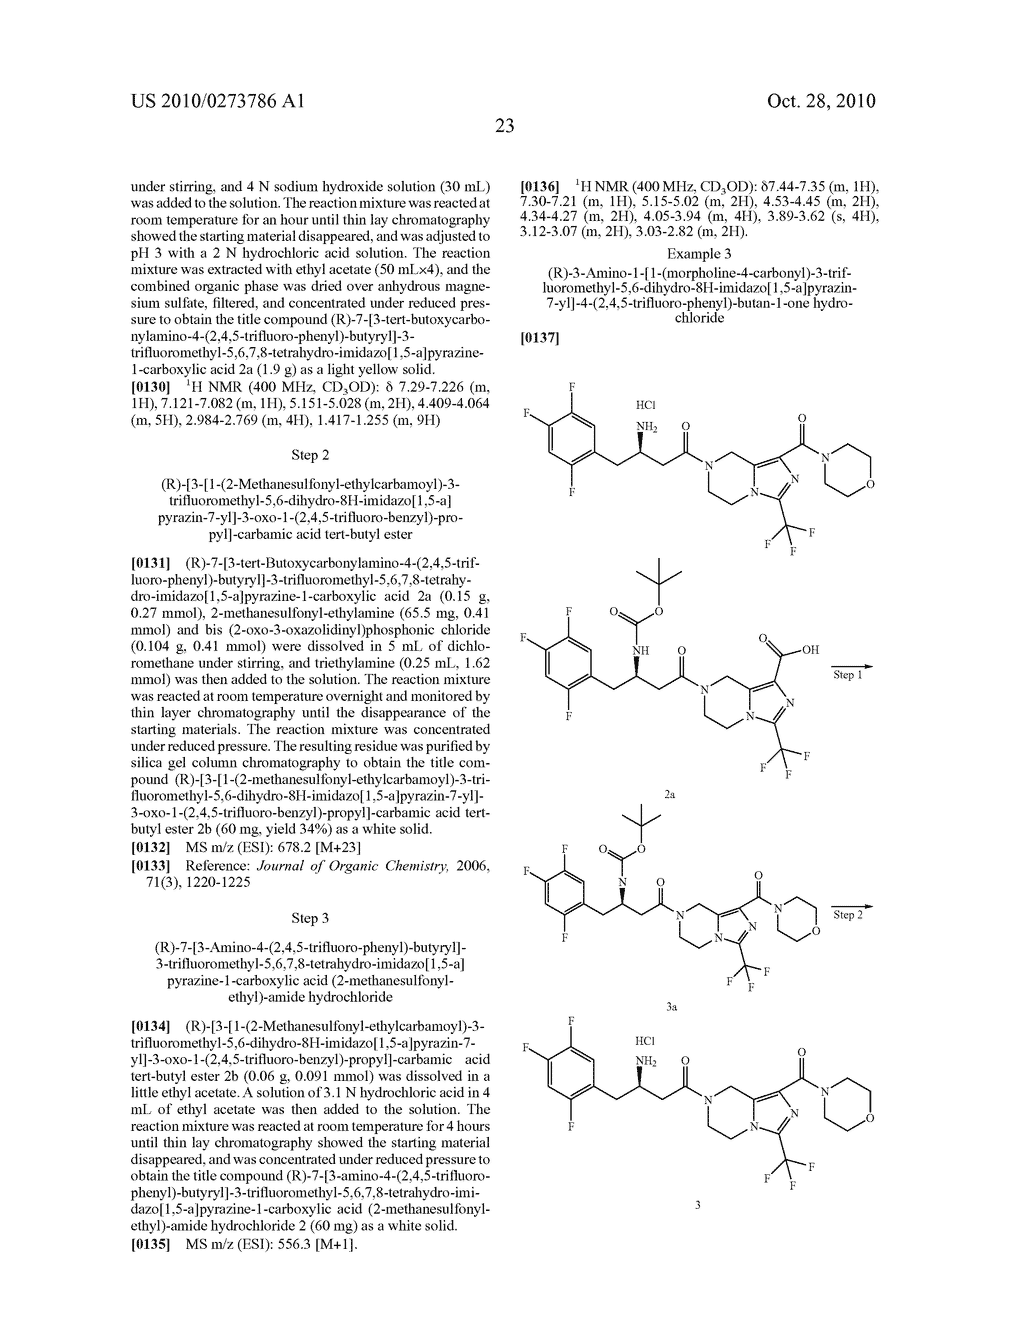 TETRAHYDRO-IMIDAZ0[1,5-A]PYRAZINE DERIVATIVES, PREPARATION PROCESS AND MEDICINAL USE THEREOF - diagram, schematic, and image 24